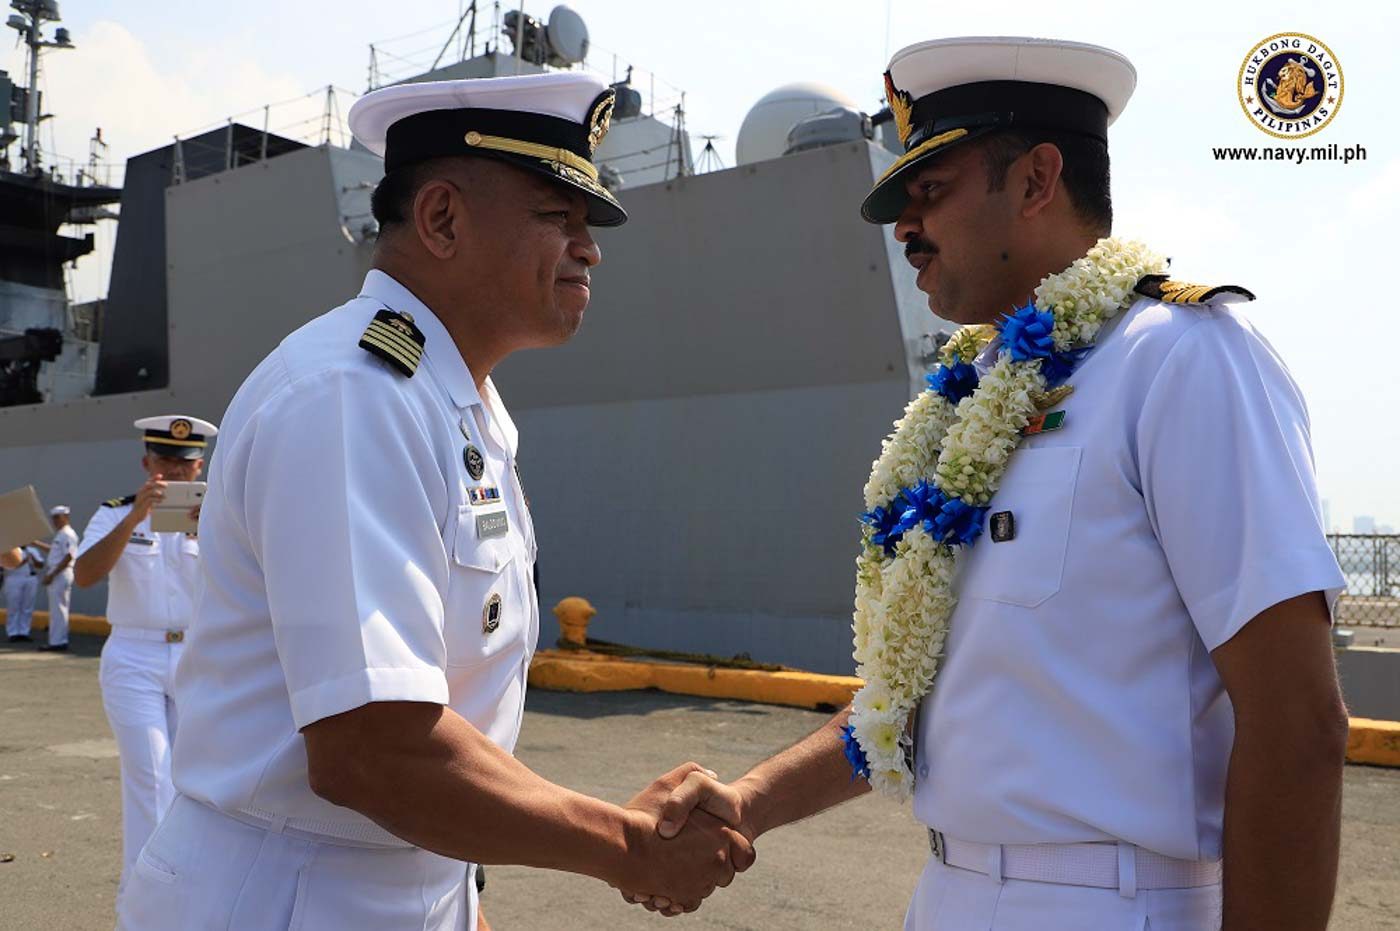 STRATEGIC TIES. Indian Navy Captain Ashwin Arvind shakes hands with Philippine Navy Captain Ernesto Baldovino. Arvind says ties between the two navies are strategic and important as neighbors in the Indo-Pacific region. Photo from the Philippine Navy 